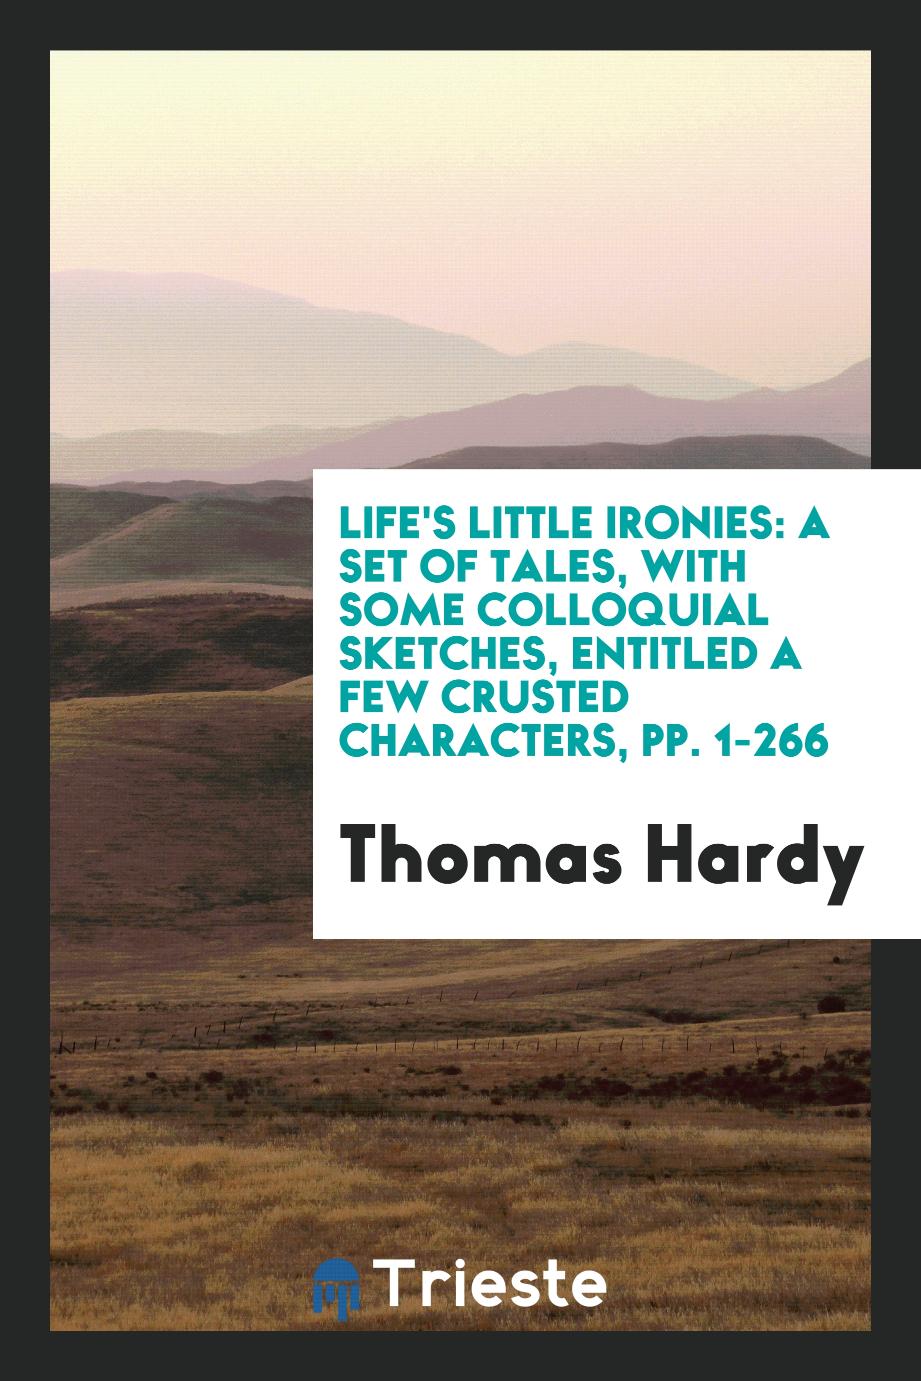 Life's Little Ironies: A Set of Tales, with Some Colloquial Sketches, Entitled a Few Crusted Characters, pp. 1-266